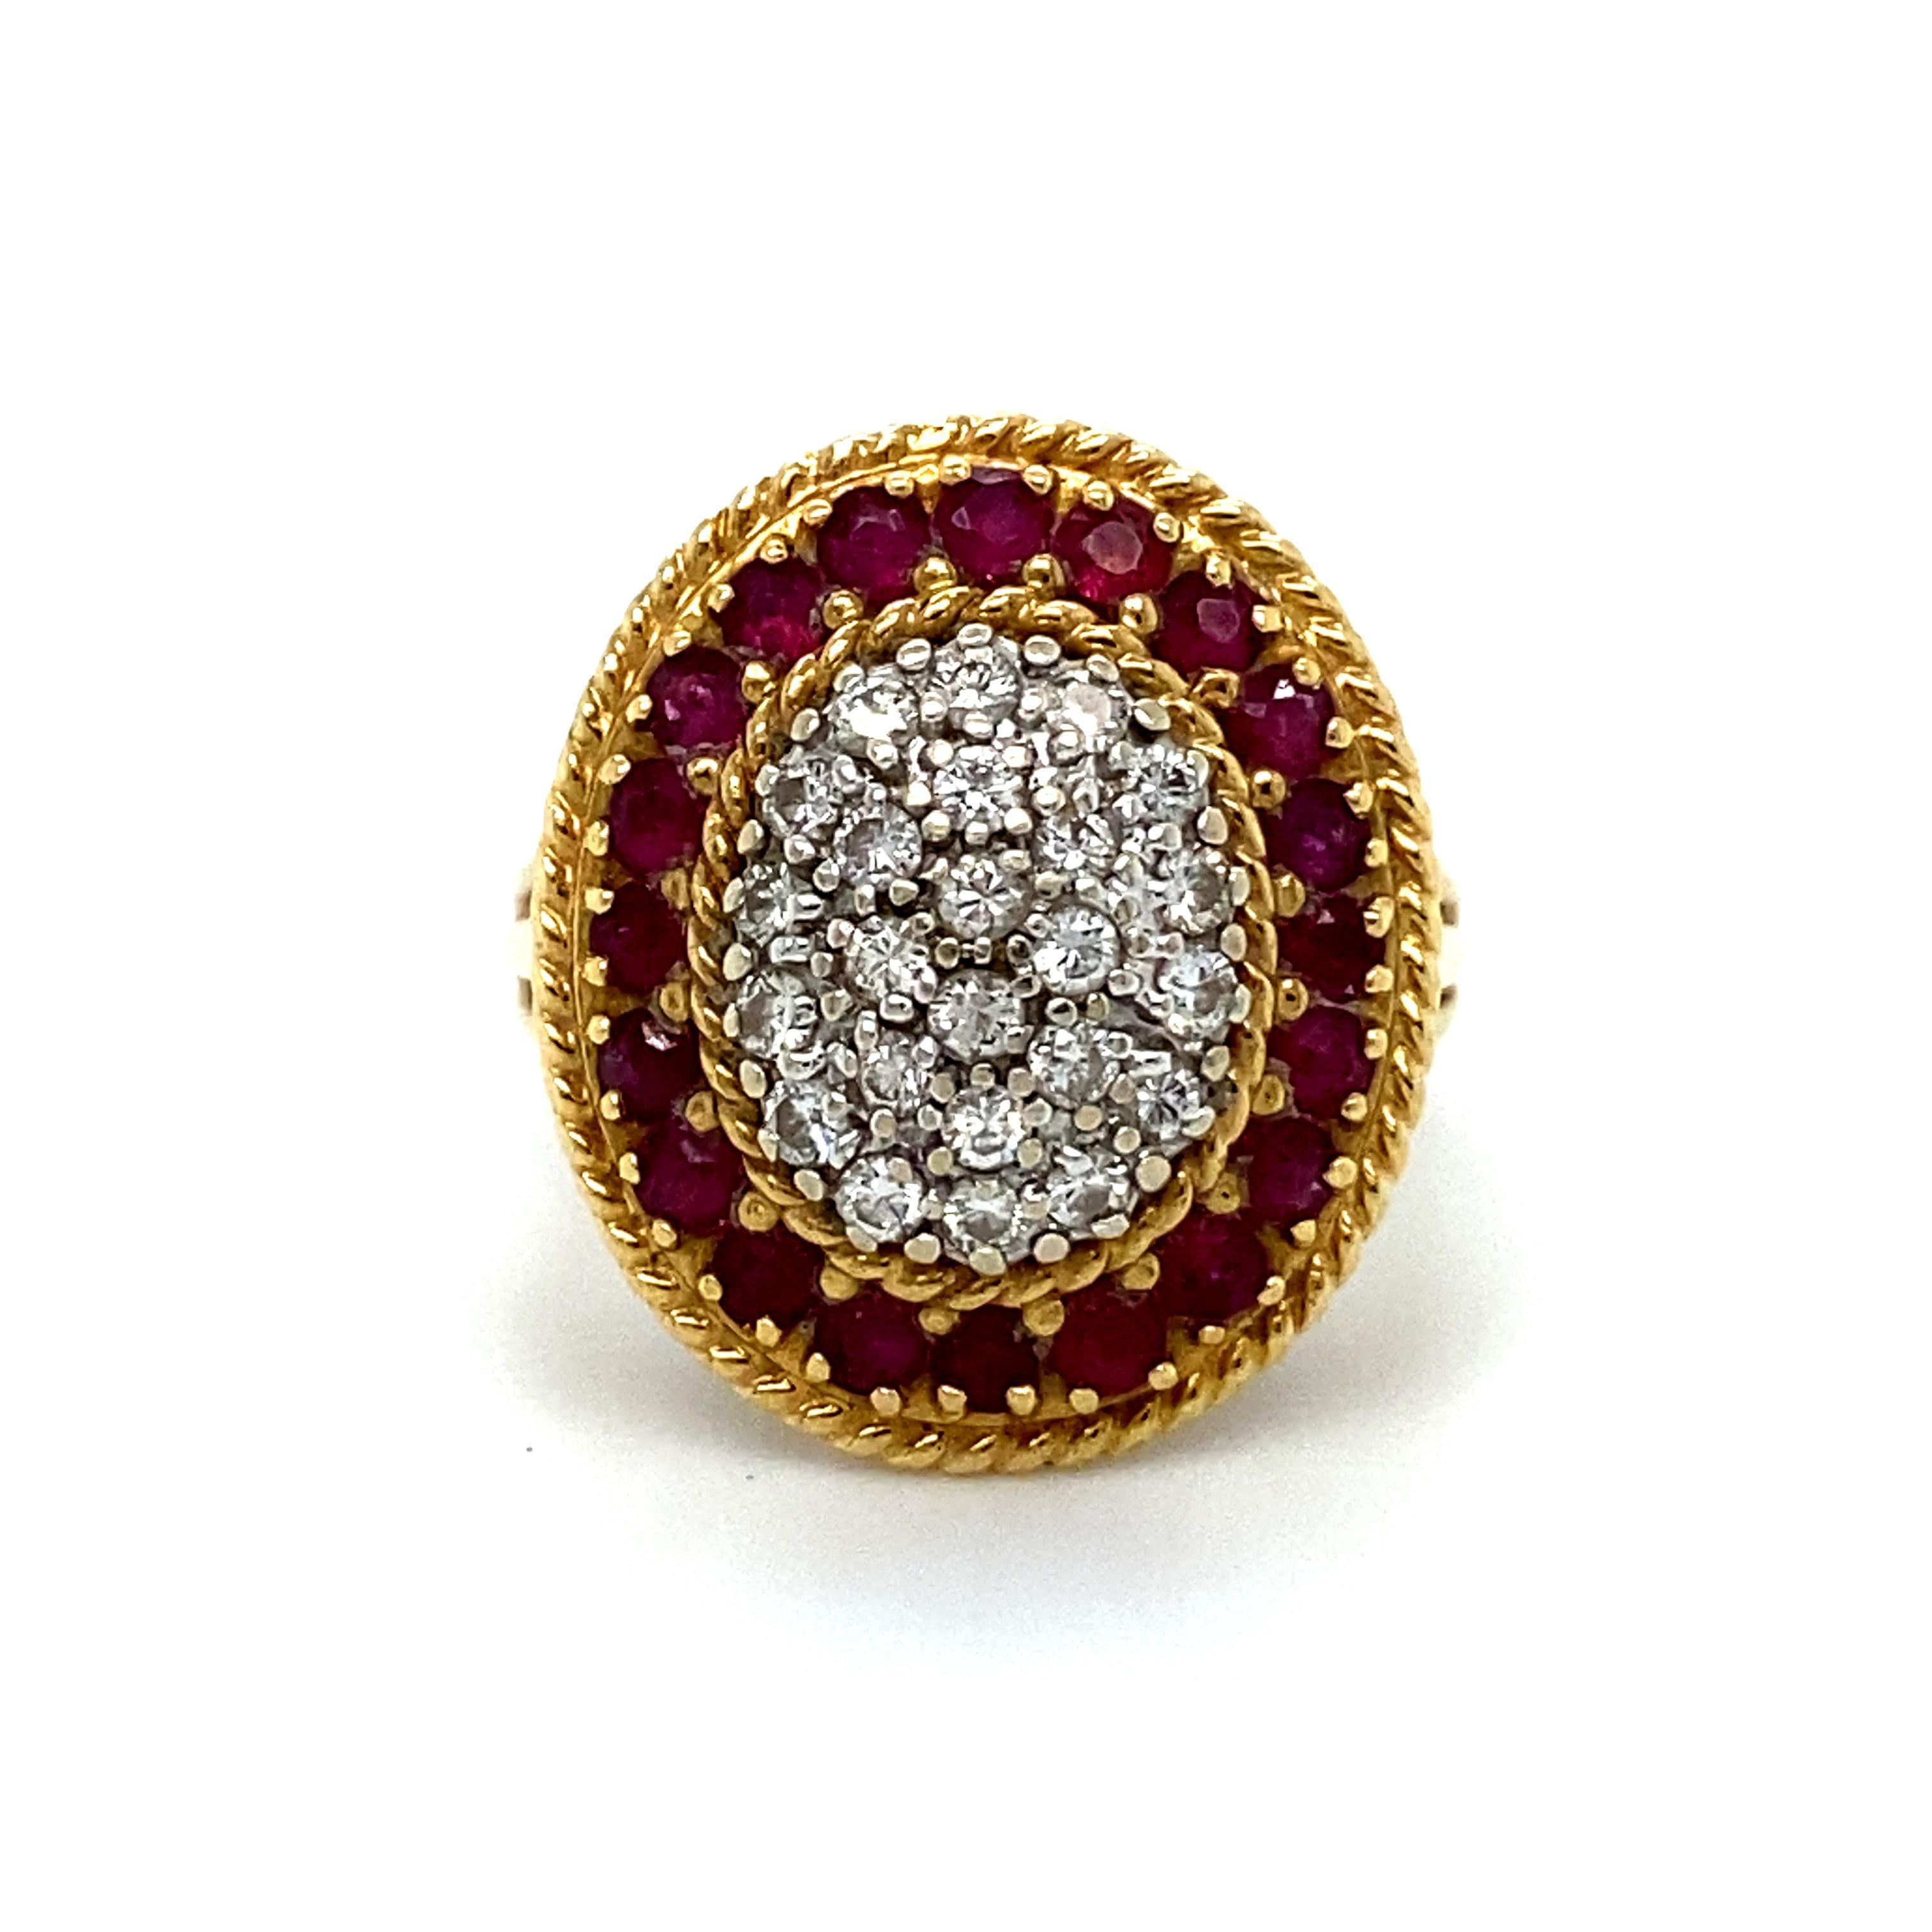 I have seen a lot of Halo Design rings, but never one like this Antique Diamond and Ruby Ring Engagement Ring! It's a One of a Kind, totally Unique, well made, amazing ring! 

Crafted in 18K Yellow Gold, the design is a stunning center cluster of